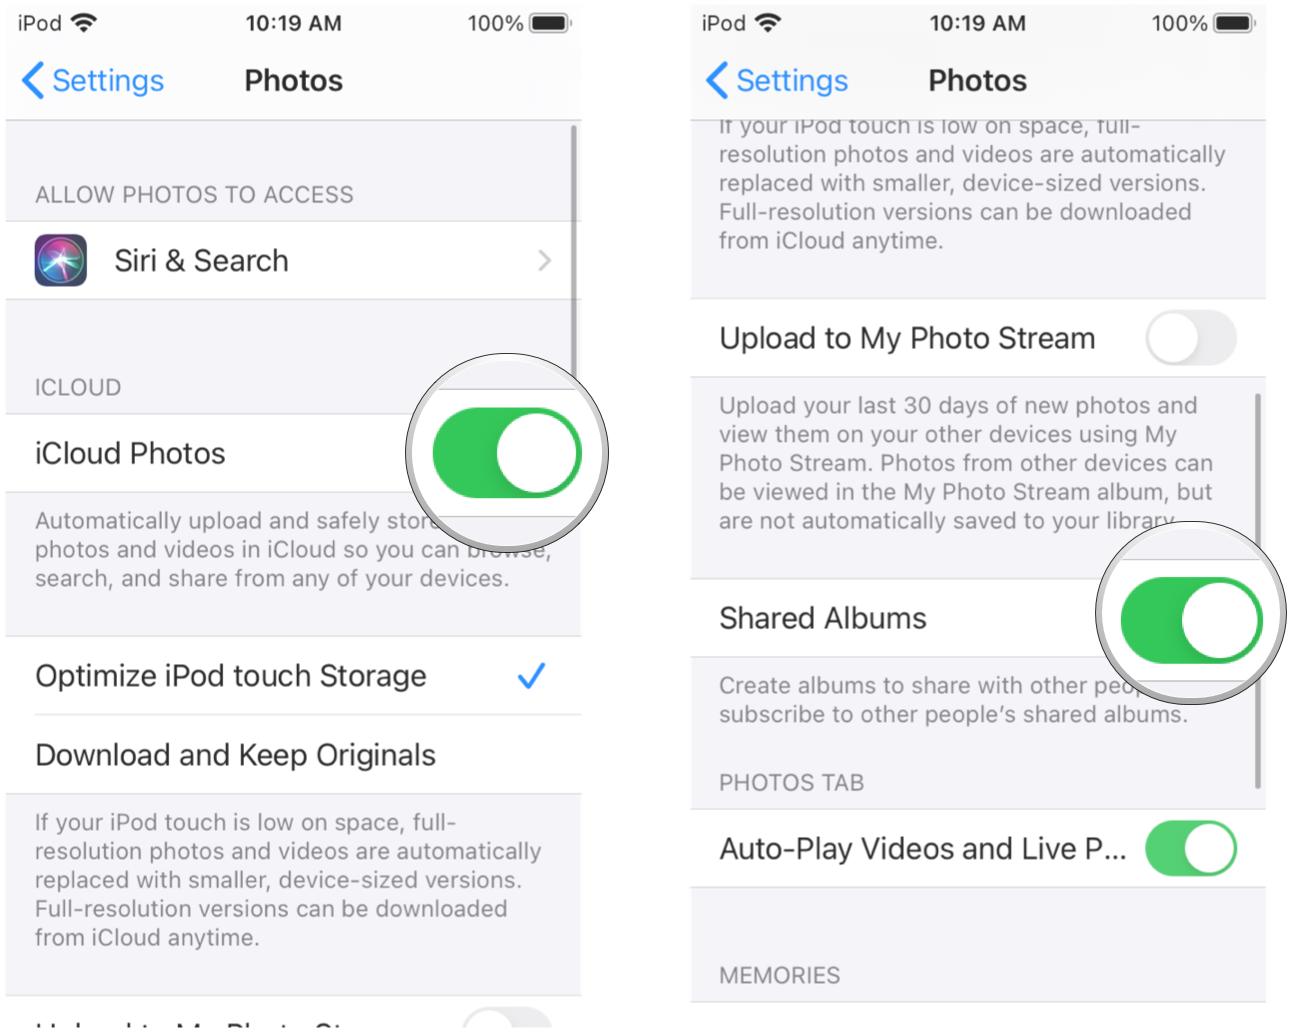 Transfer photos from mac to iphone by Enabling iCloud Photo Sharing on your iPhone or iPad by showing steps: Toggle iCloud Photo Library to ON, as well as Shared Albums to ON